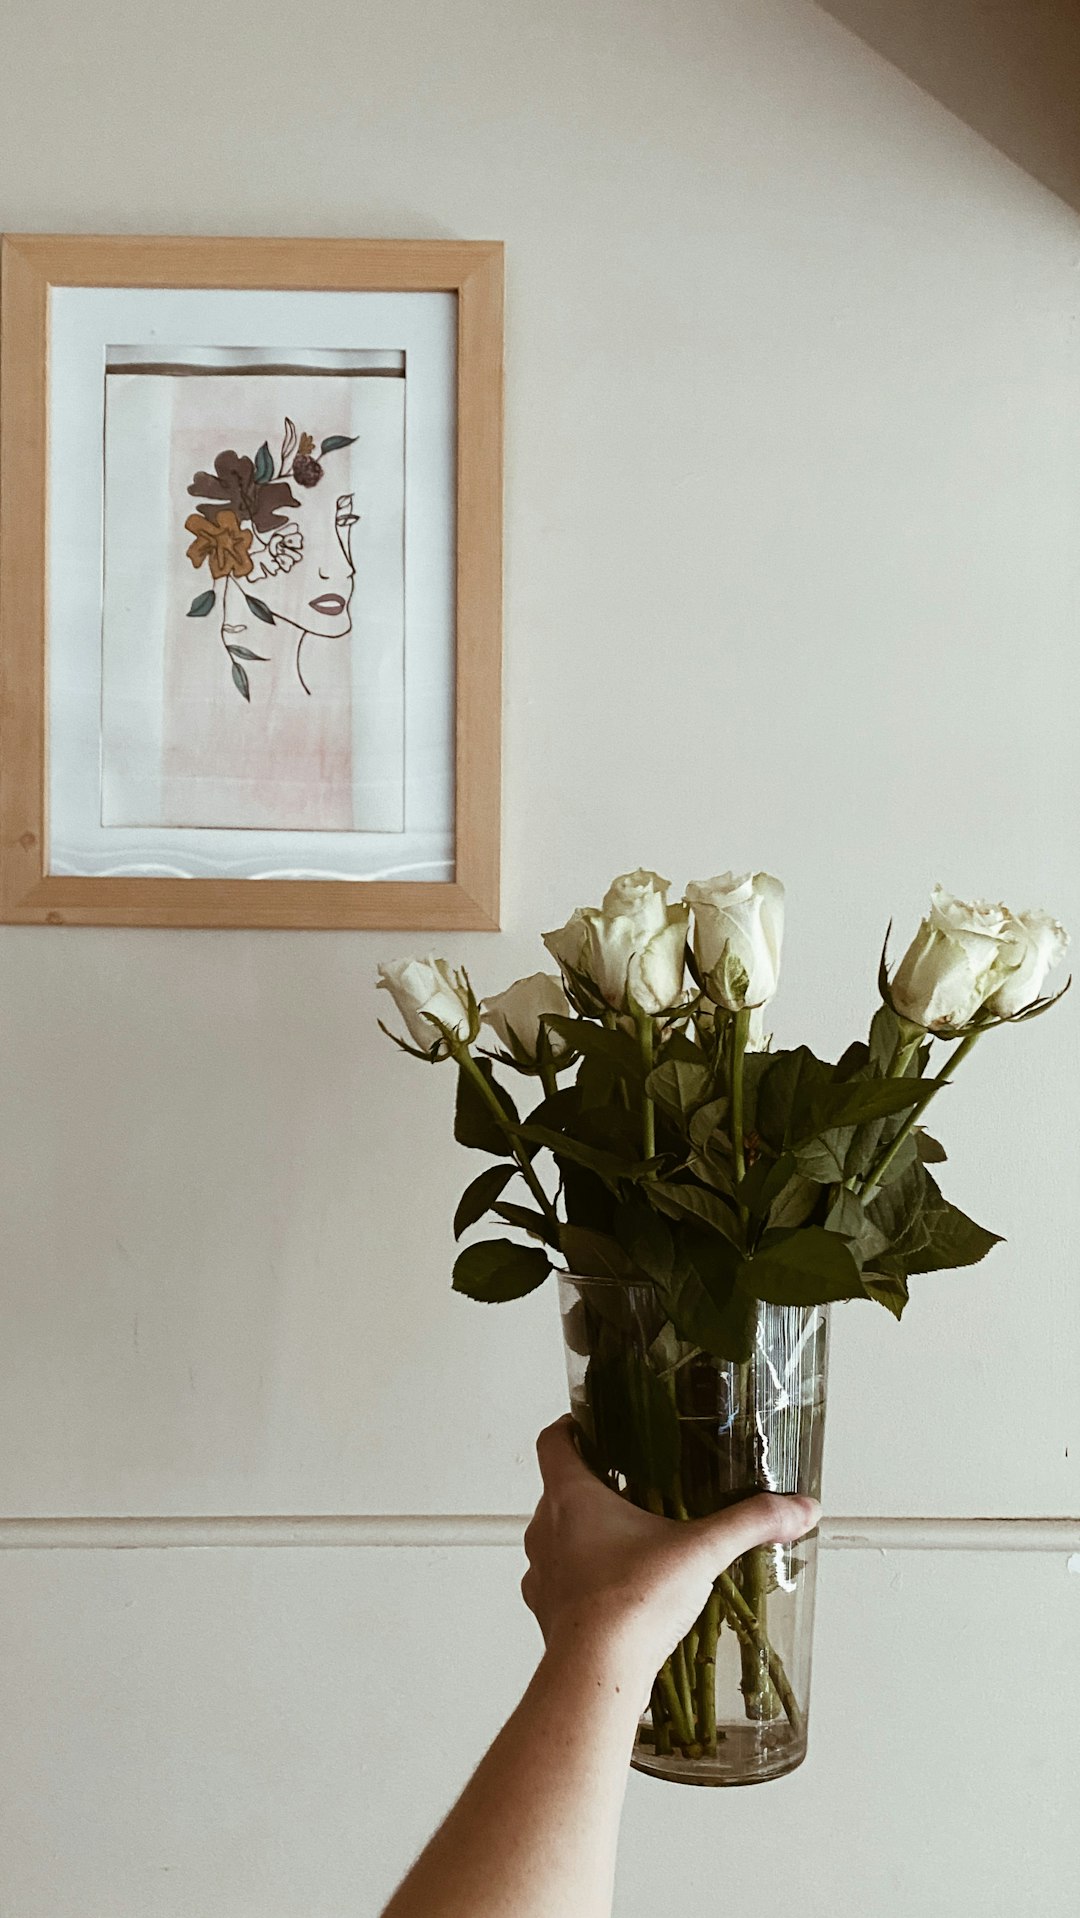 white roses in clear glass vase